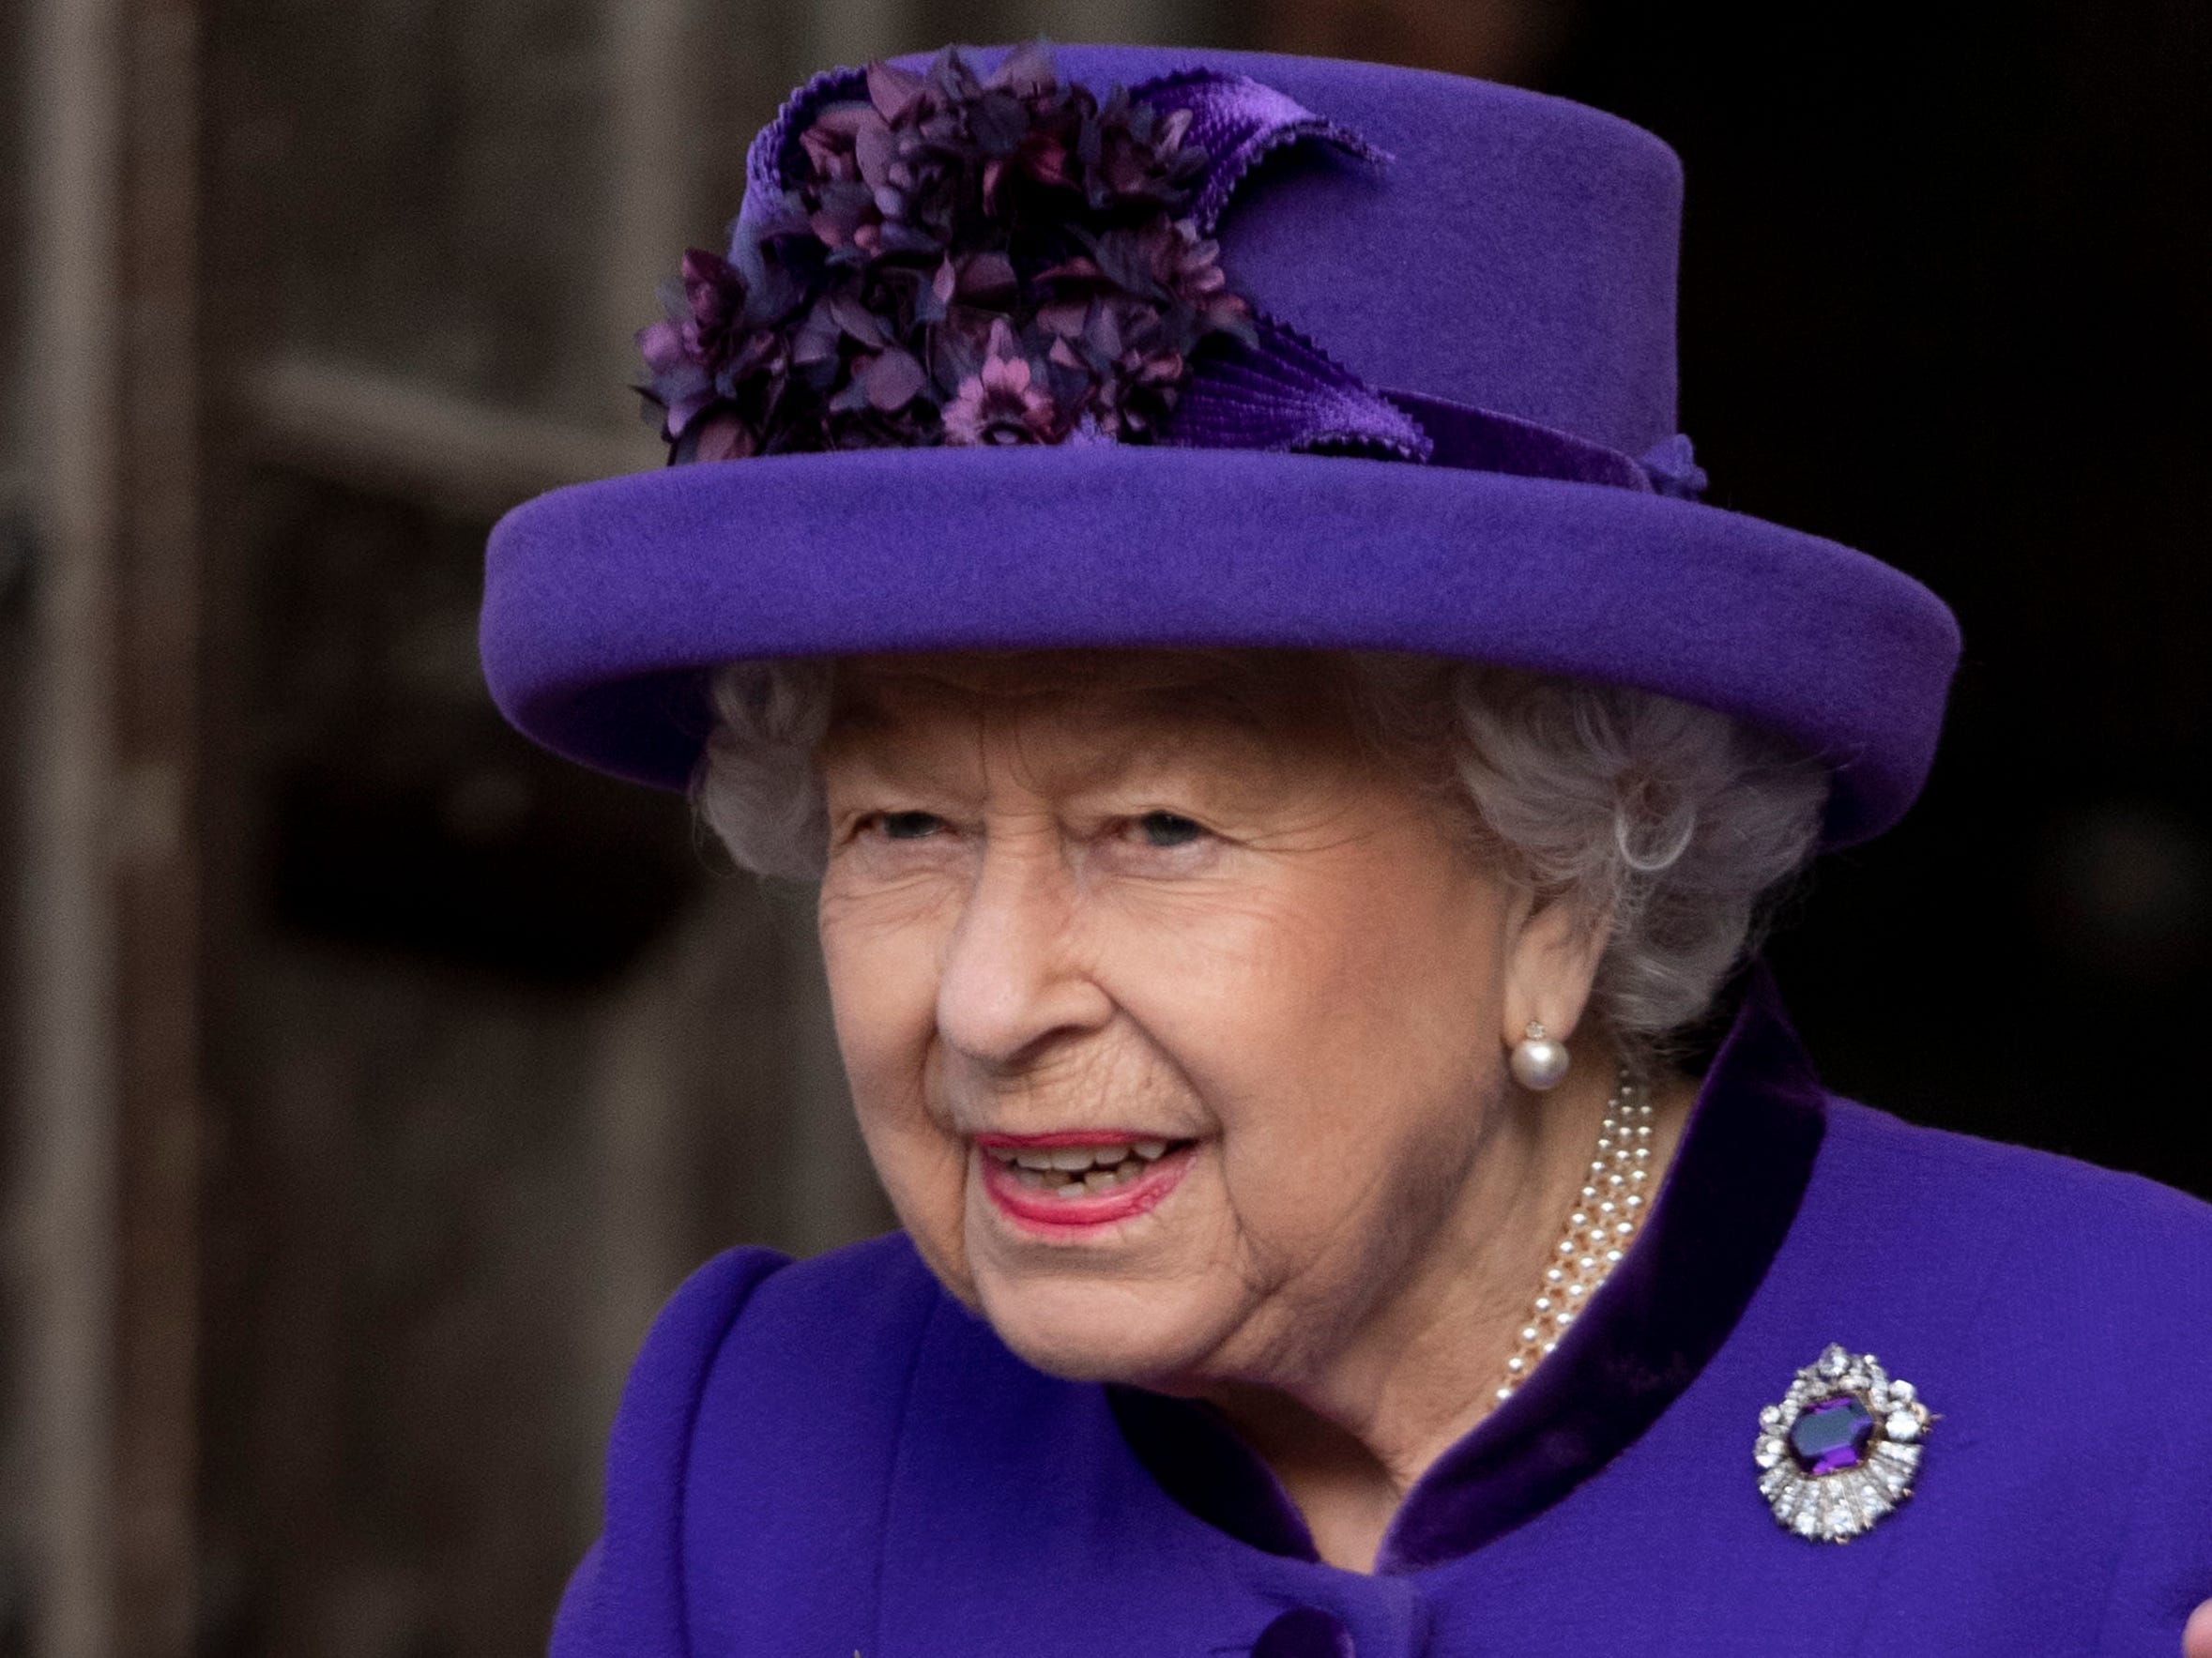 Queen Elizabeth II attends the Commonwealth Day Service at Westminster Abbey on March 11, 2019 in London, England.